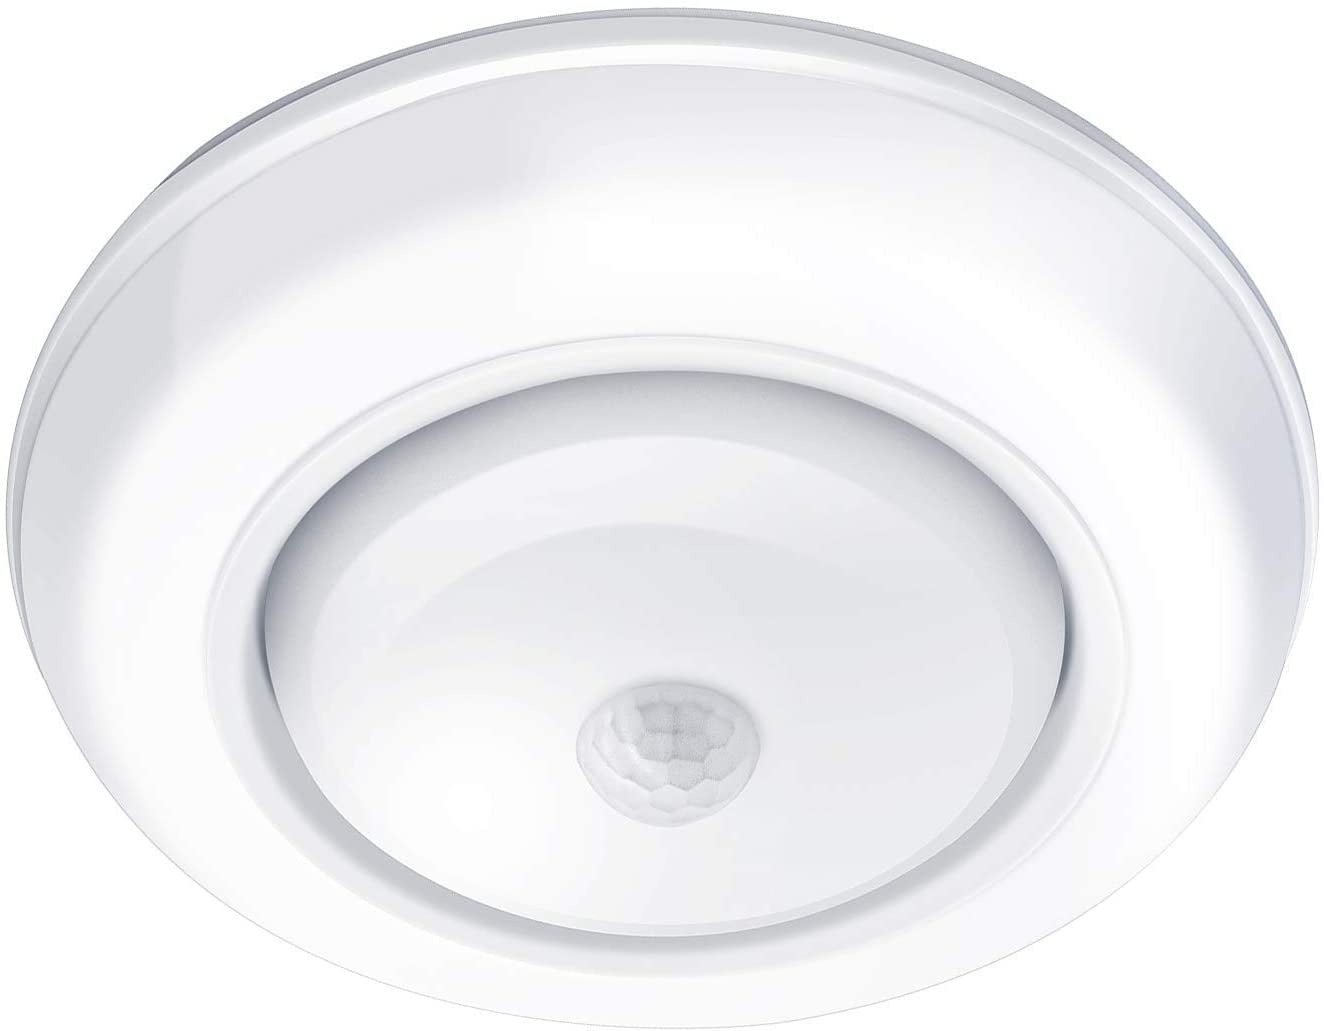 Honwell LED Ceiling Lamp With Motion Detector Wireless Sensor Light with Battery 